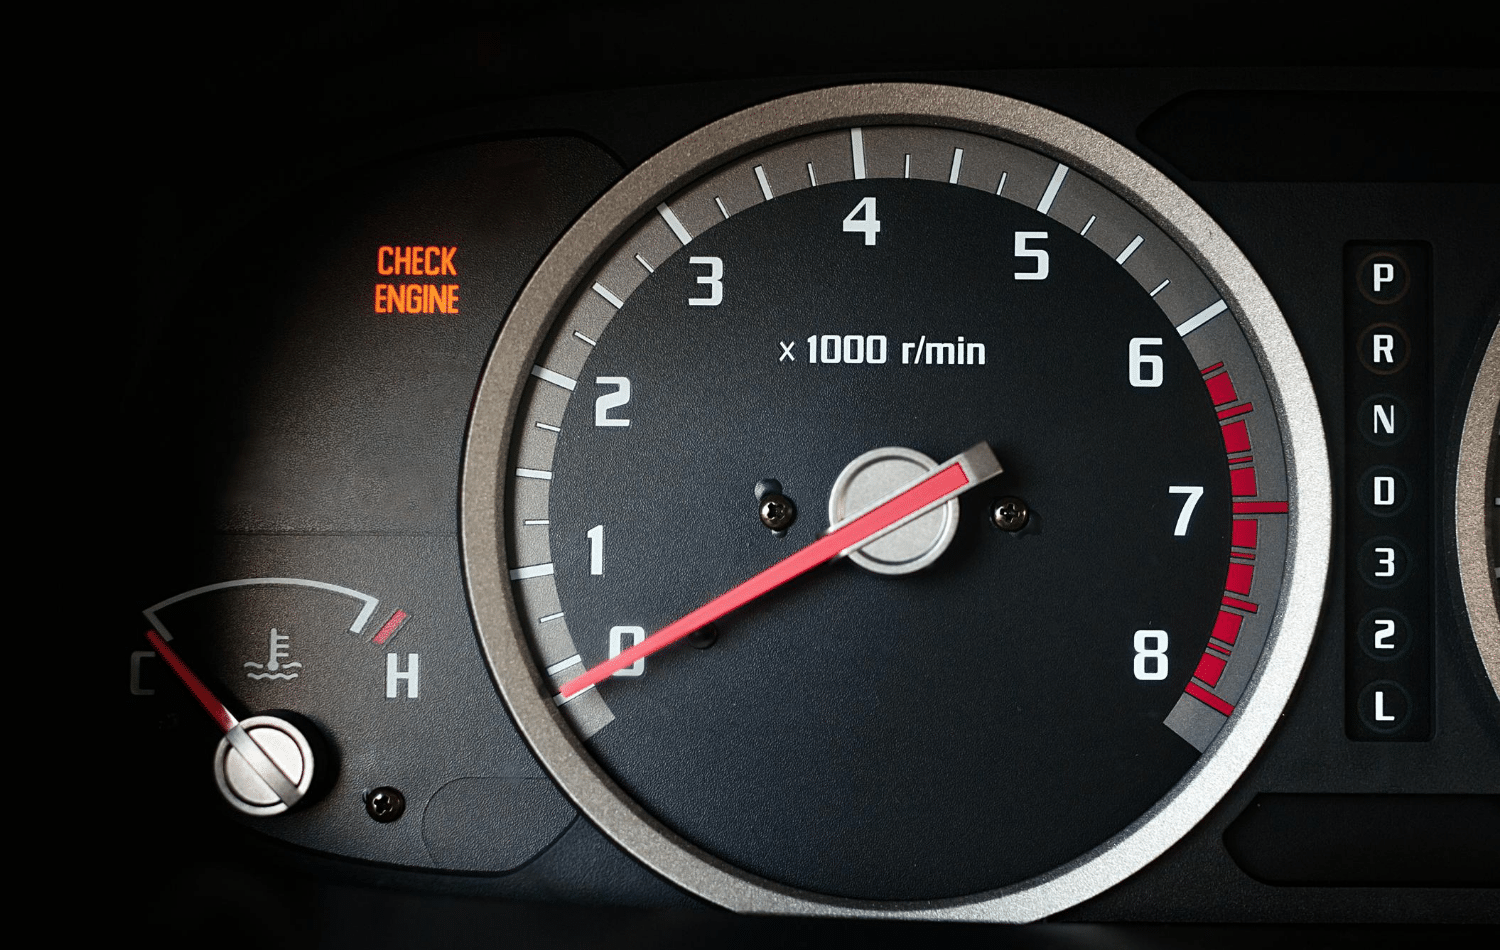 Stop Driving if Your Check Engine Light Comes On